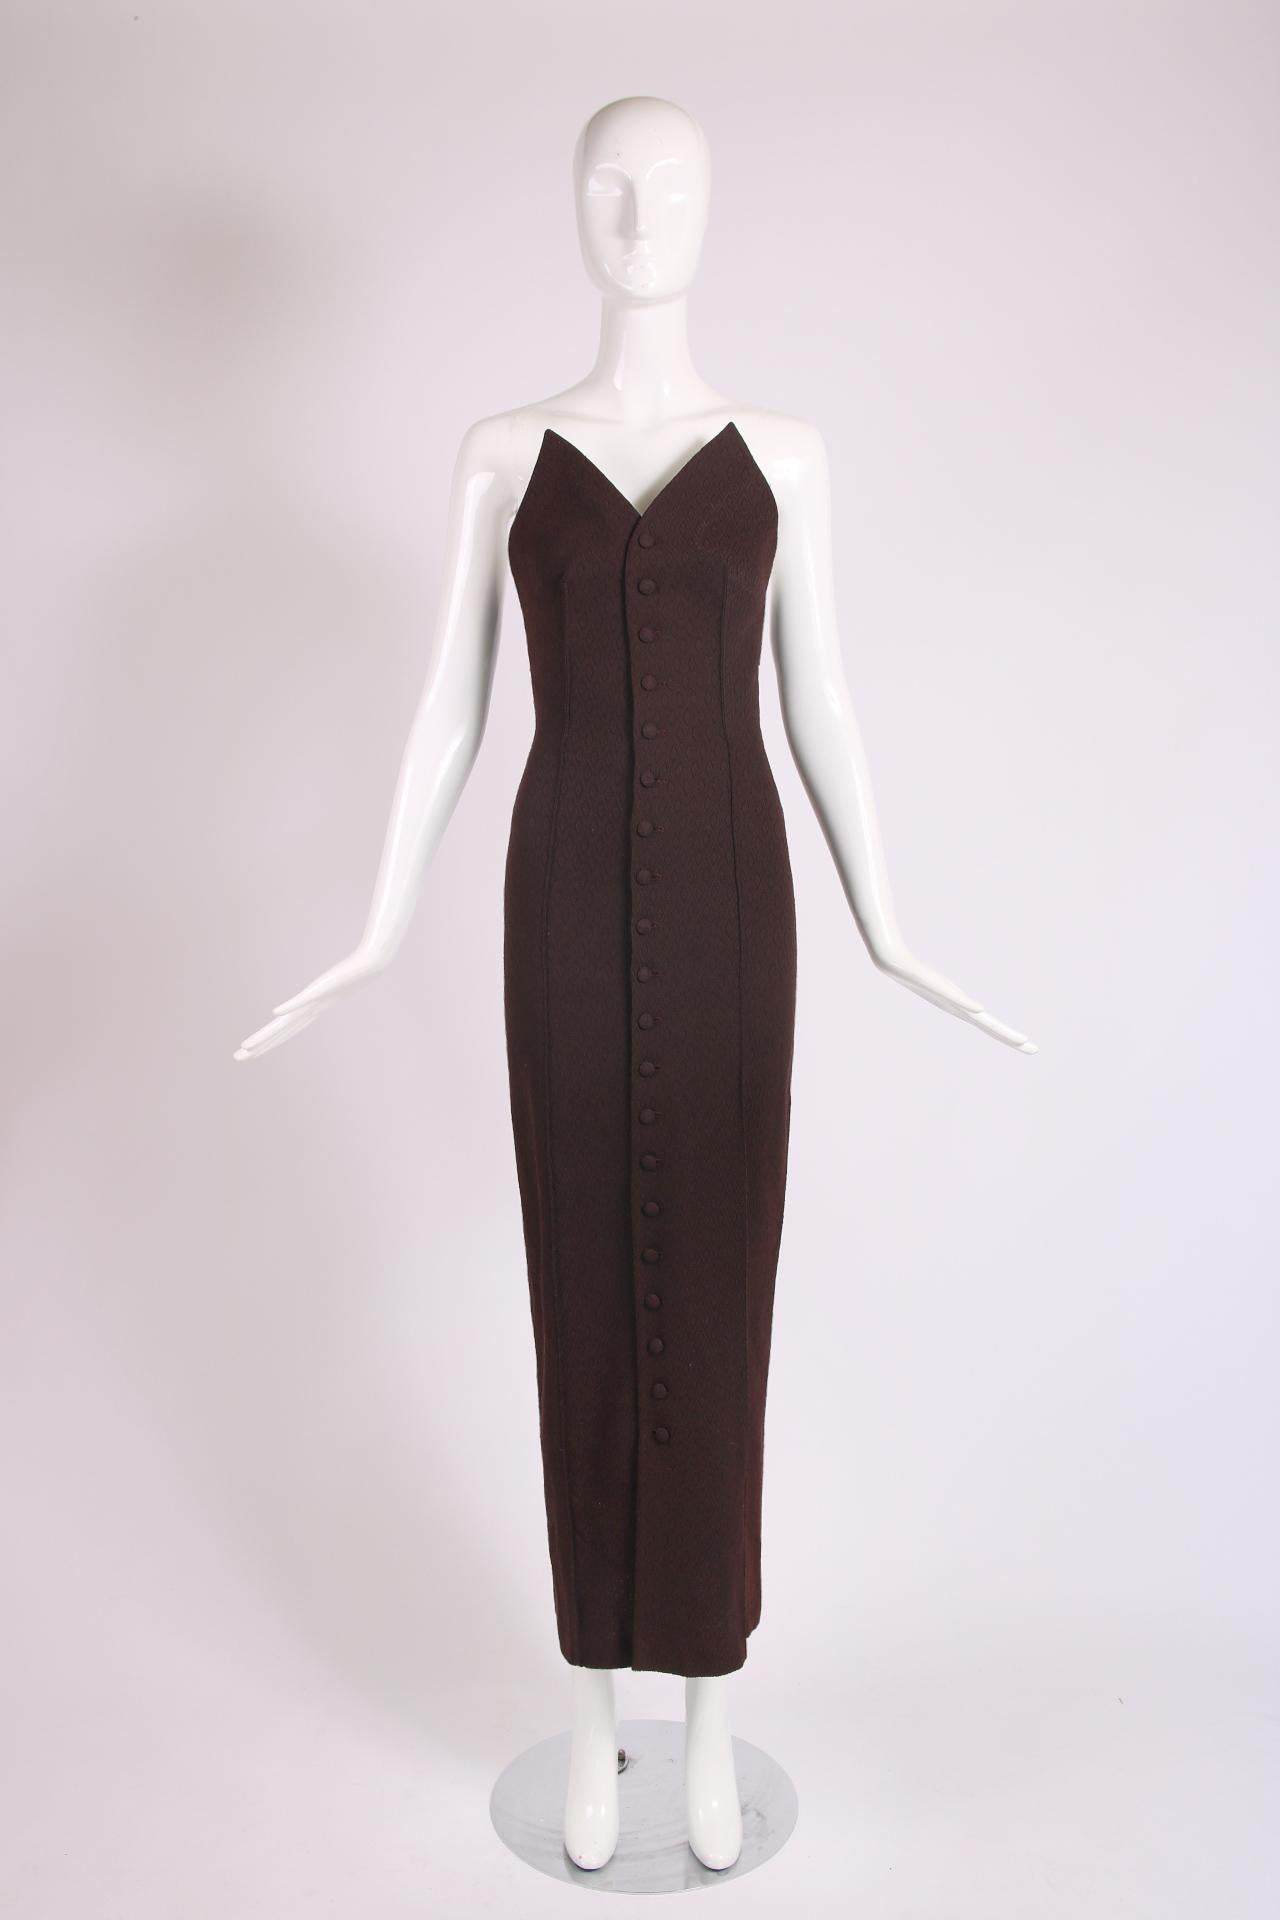 Jean Paul Gaultier brown strapless column dress featuring fabric covered button closures down center front, buckled back straps and made from diamond pattern fabric. There is no fabric tag - and the size tag says US 6 but this is NOT a size 6. It